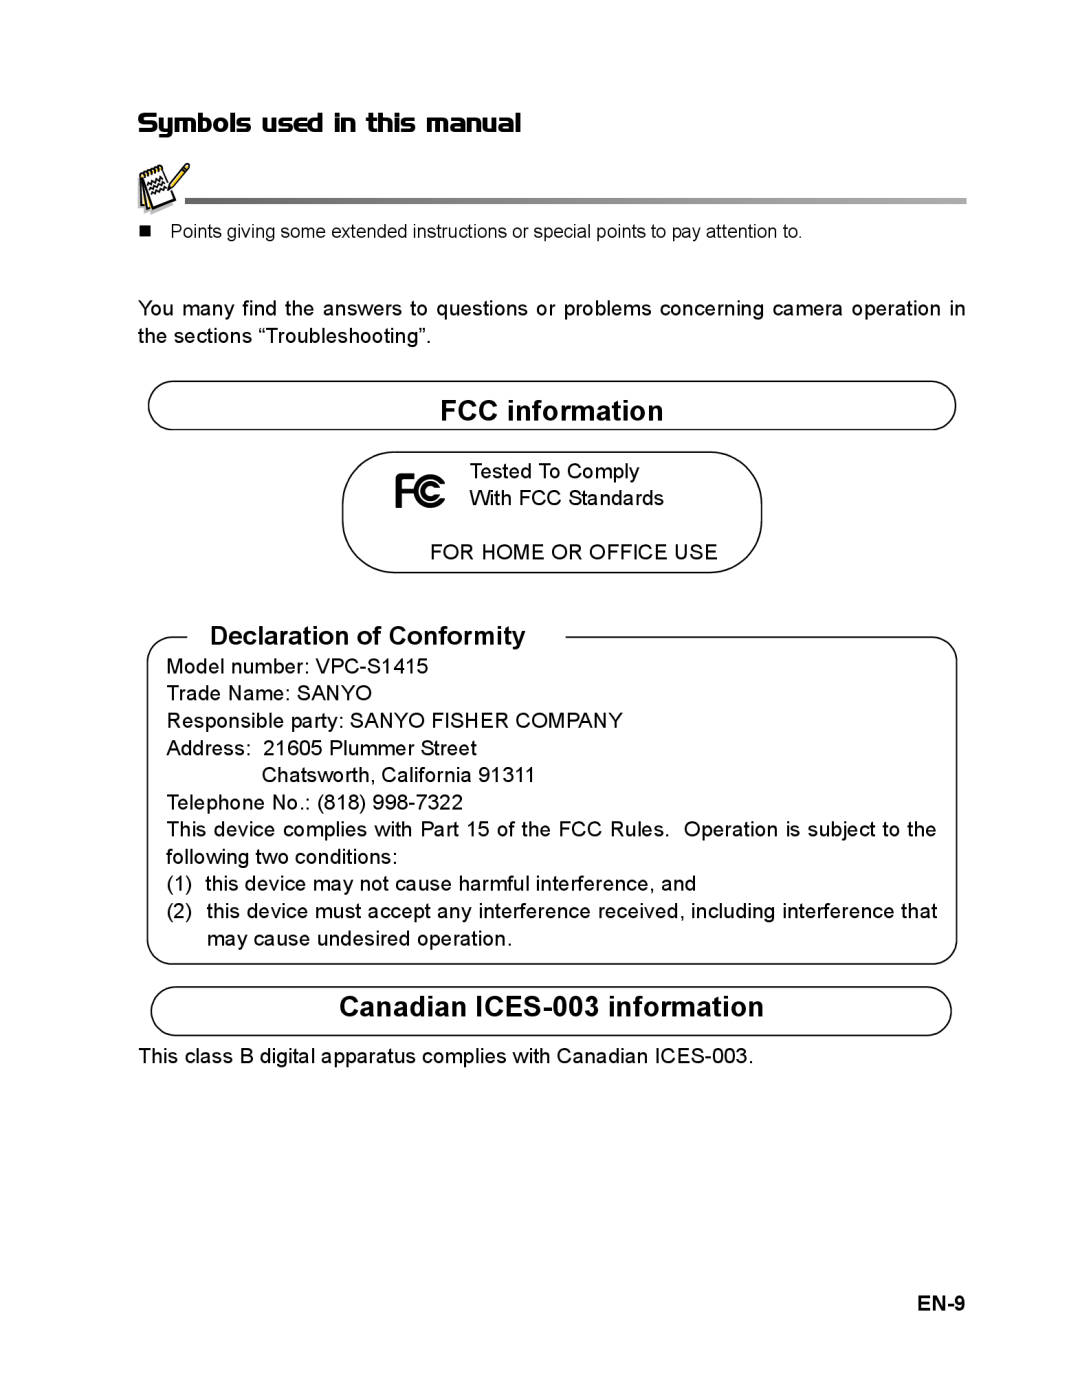 Sanyo VPC-S1415 Symbols used in this manual, FCC information, Canadian ICES-003 information, EN-9 